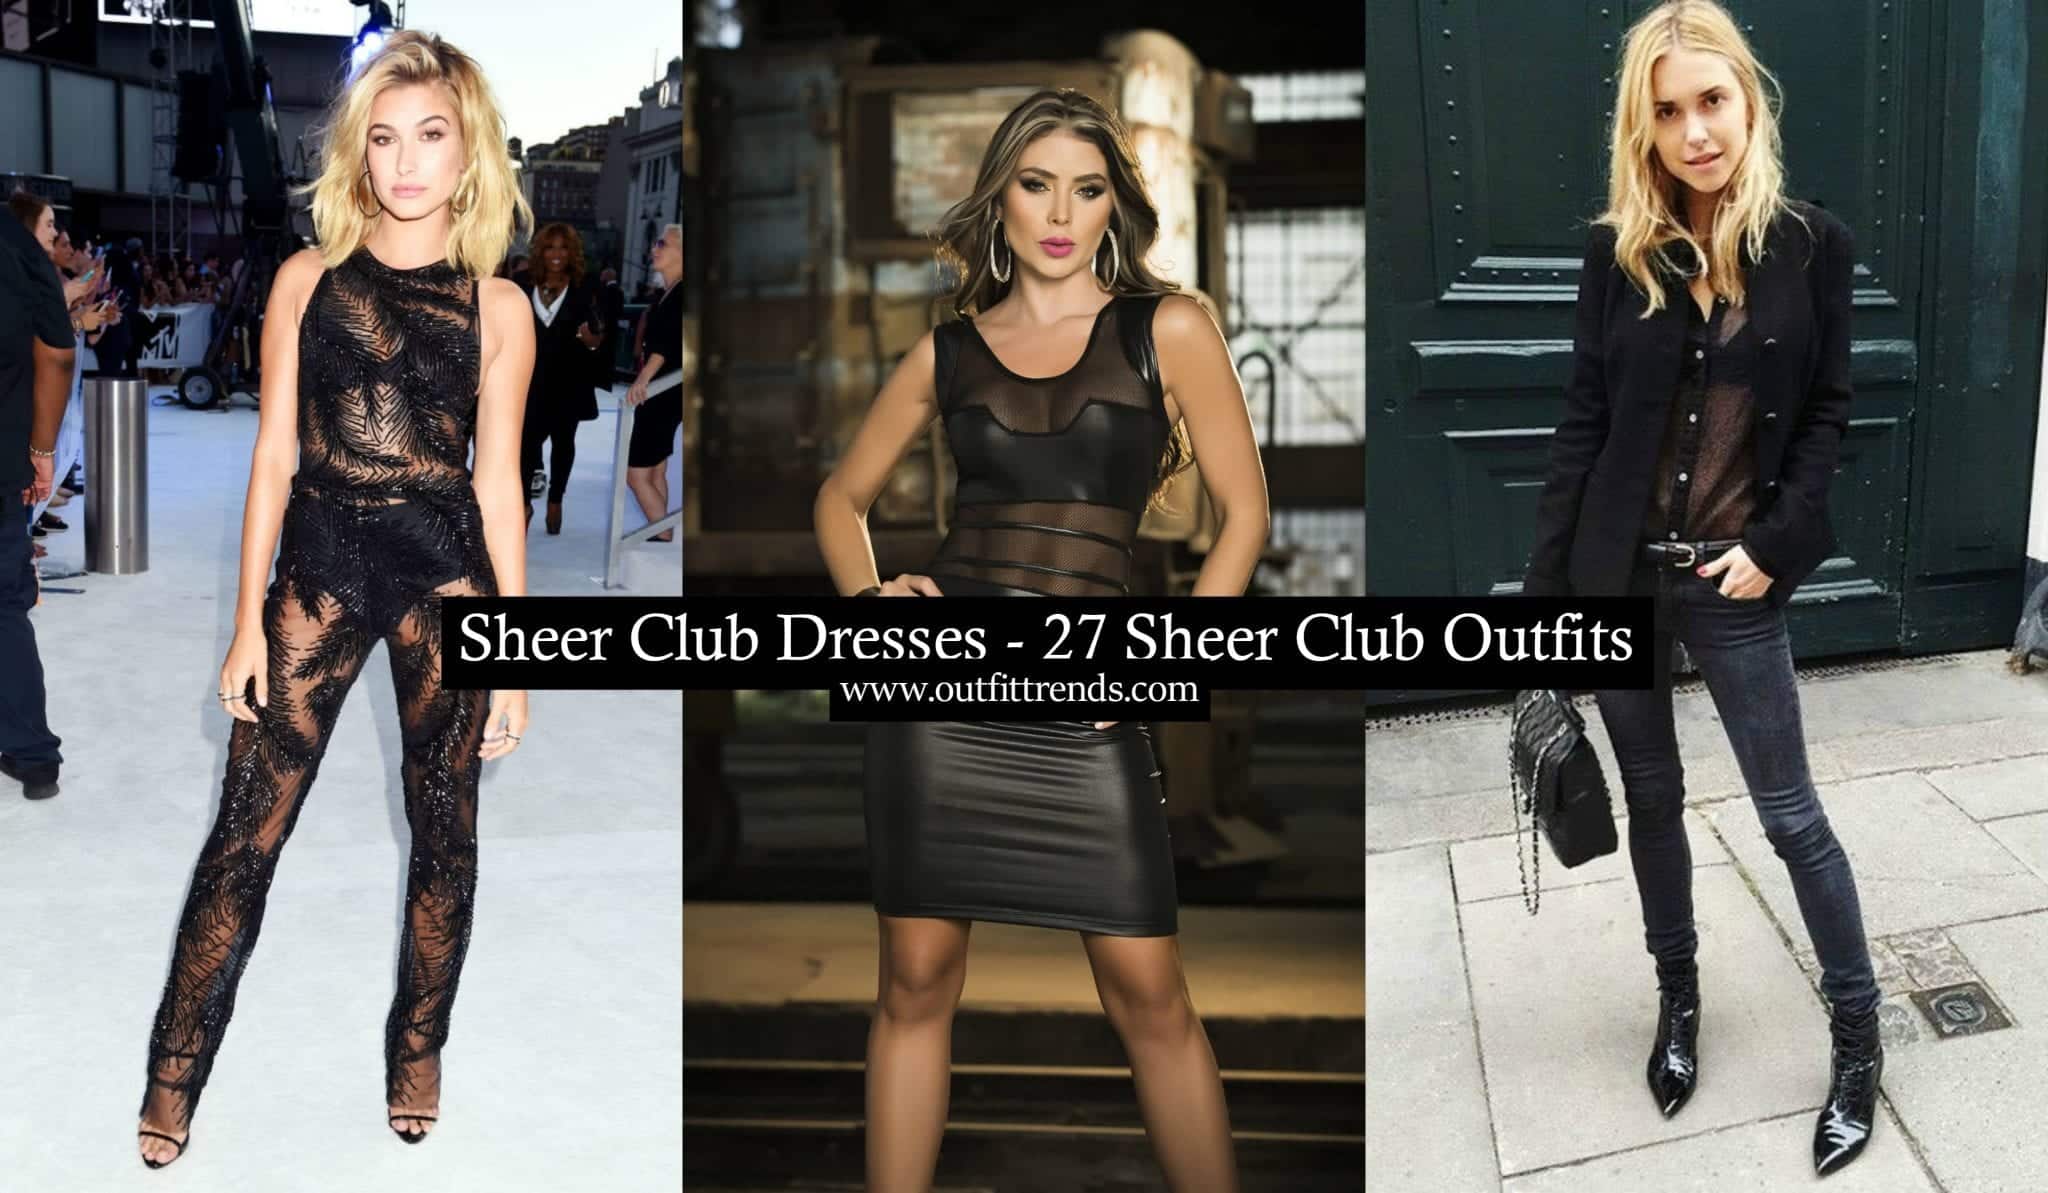 Girls Sheer Club Dresses - 27 Sheer Outfits for Clubbing